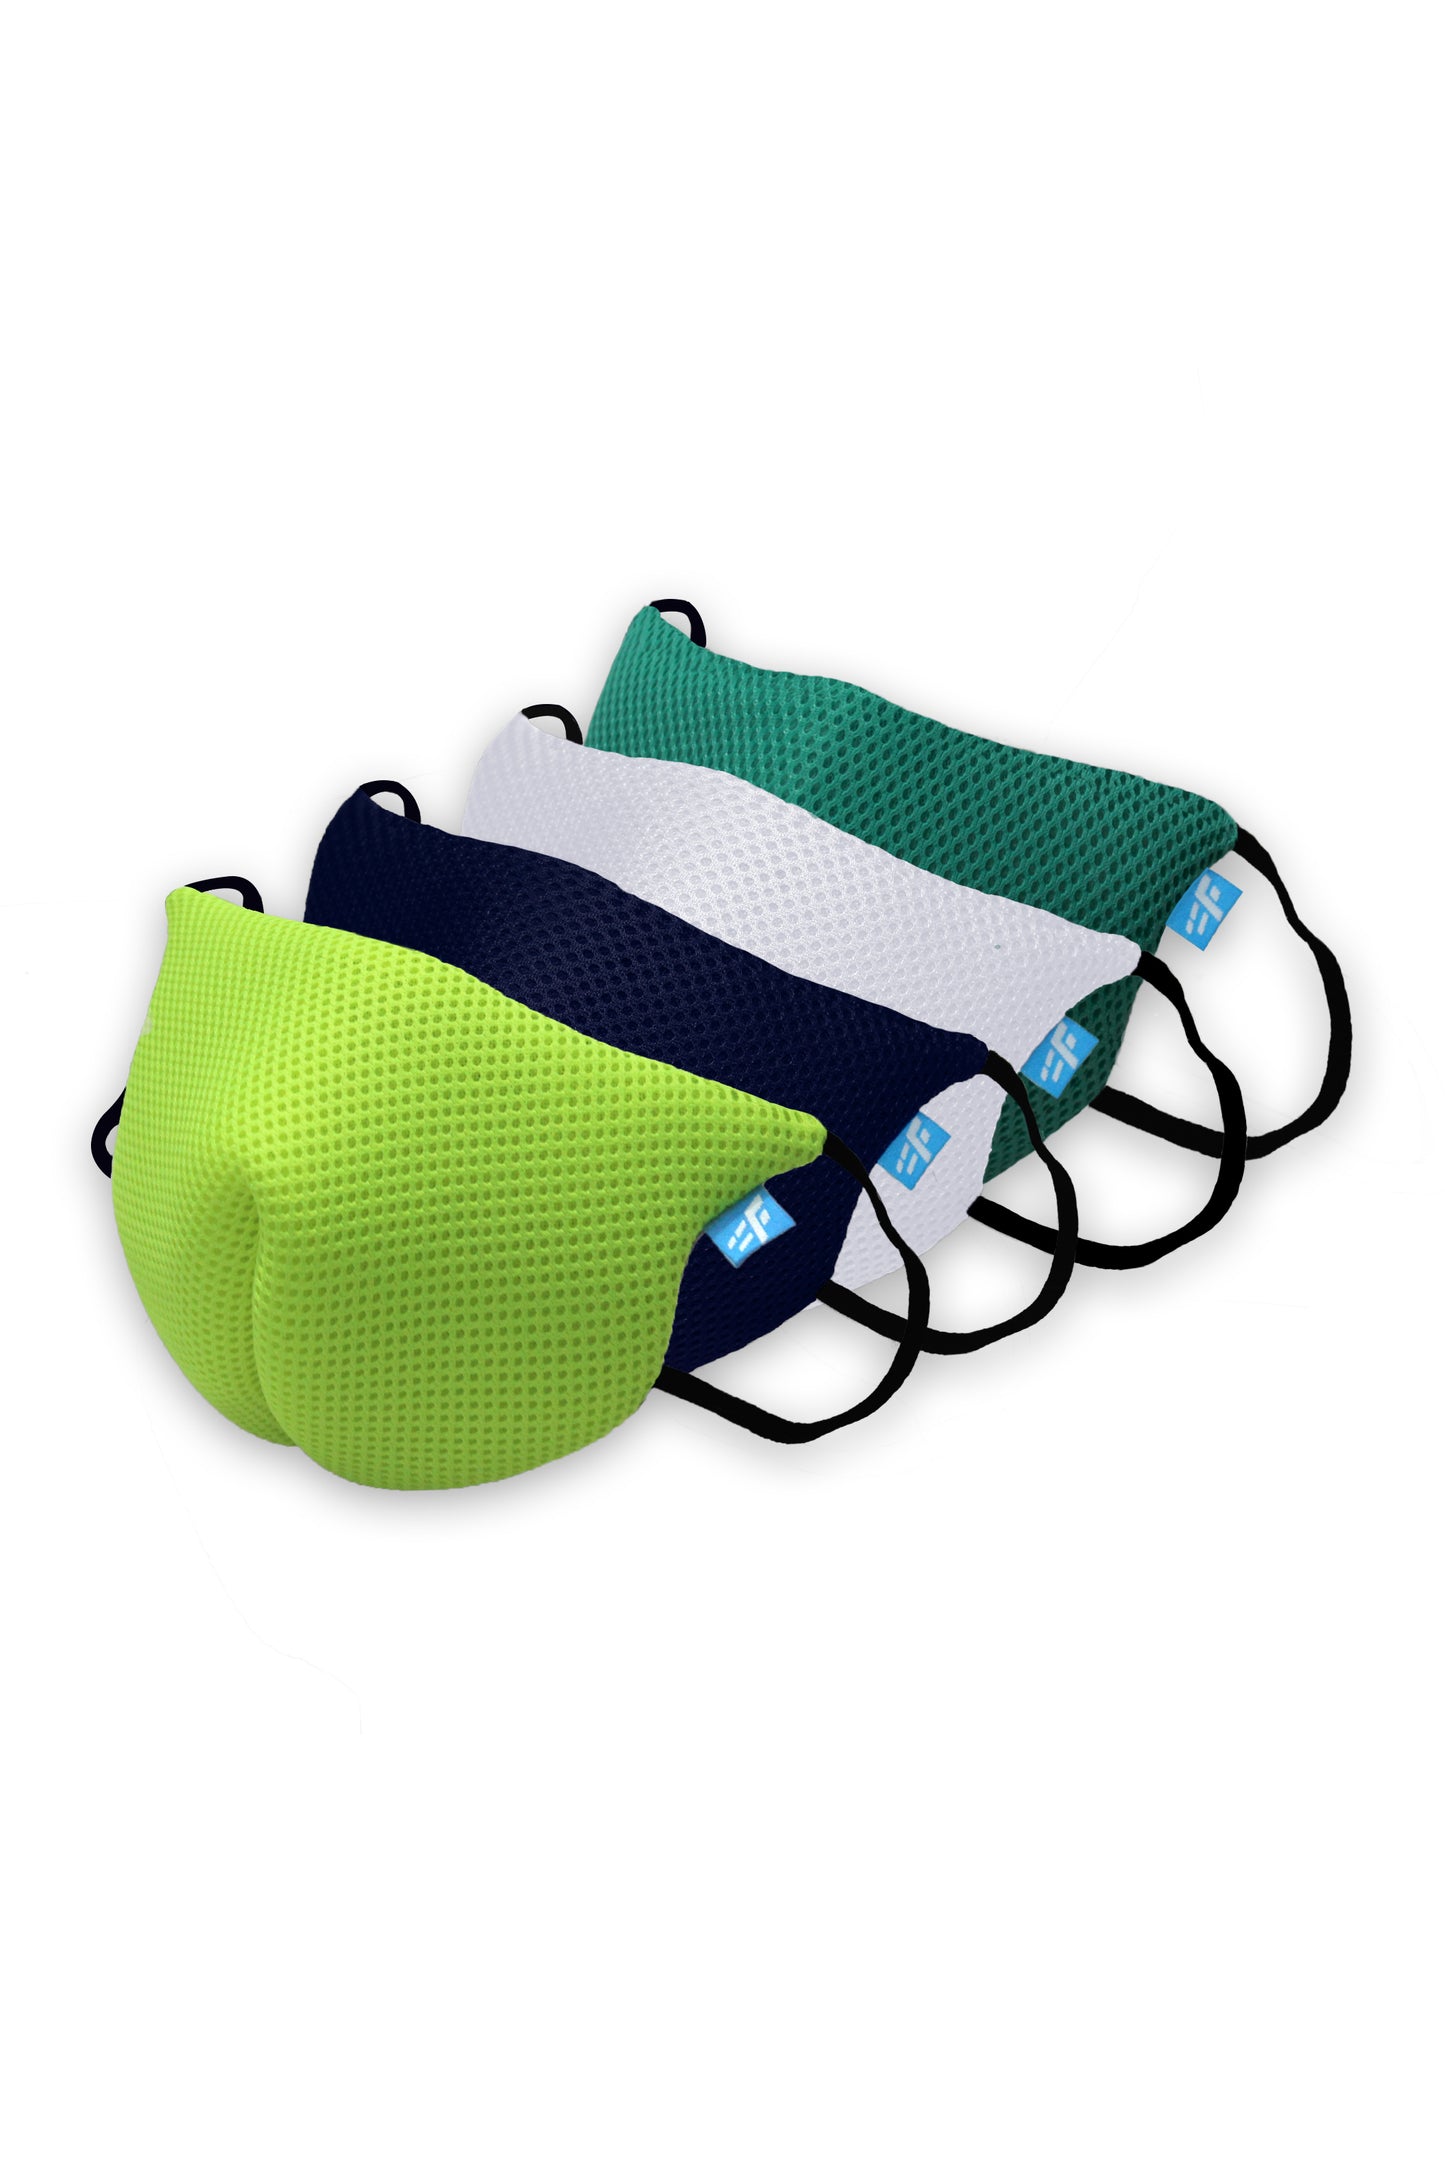 F Gear Coroguard F95 Mask Navy Blue-F green-White-Sea green 7 layer ISO CE SITRA lab certified >95% Bacteria Filtration PACK-4